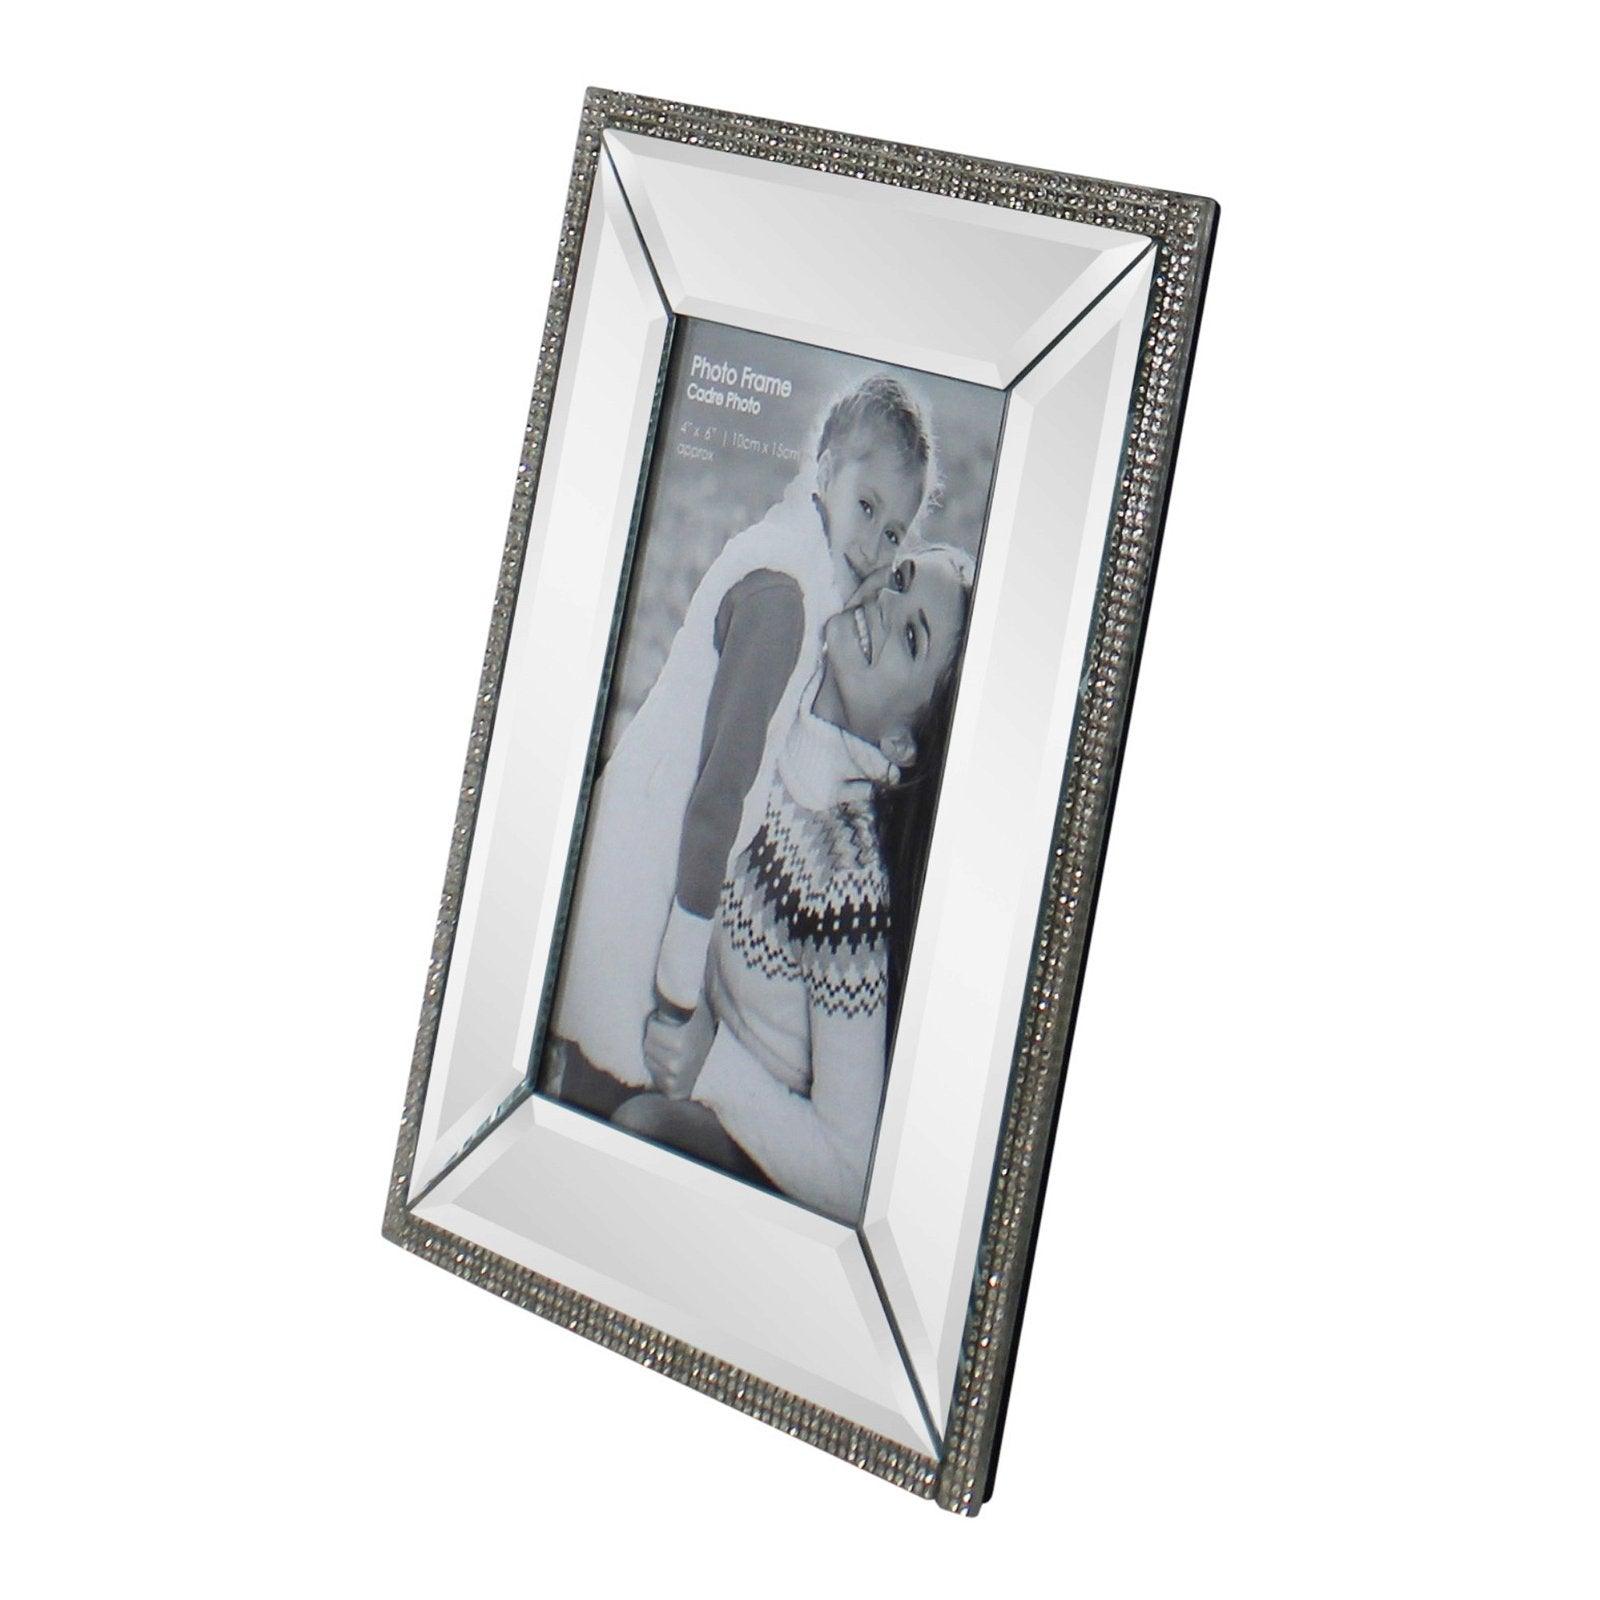 View 4 x 6 Mirrored Freestanding Photo Frame With Crystal Detail information